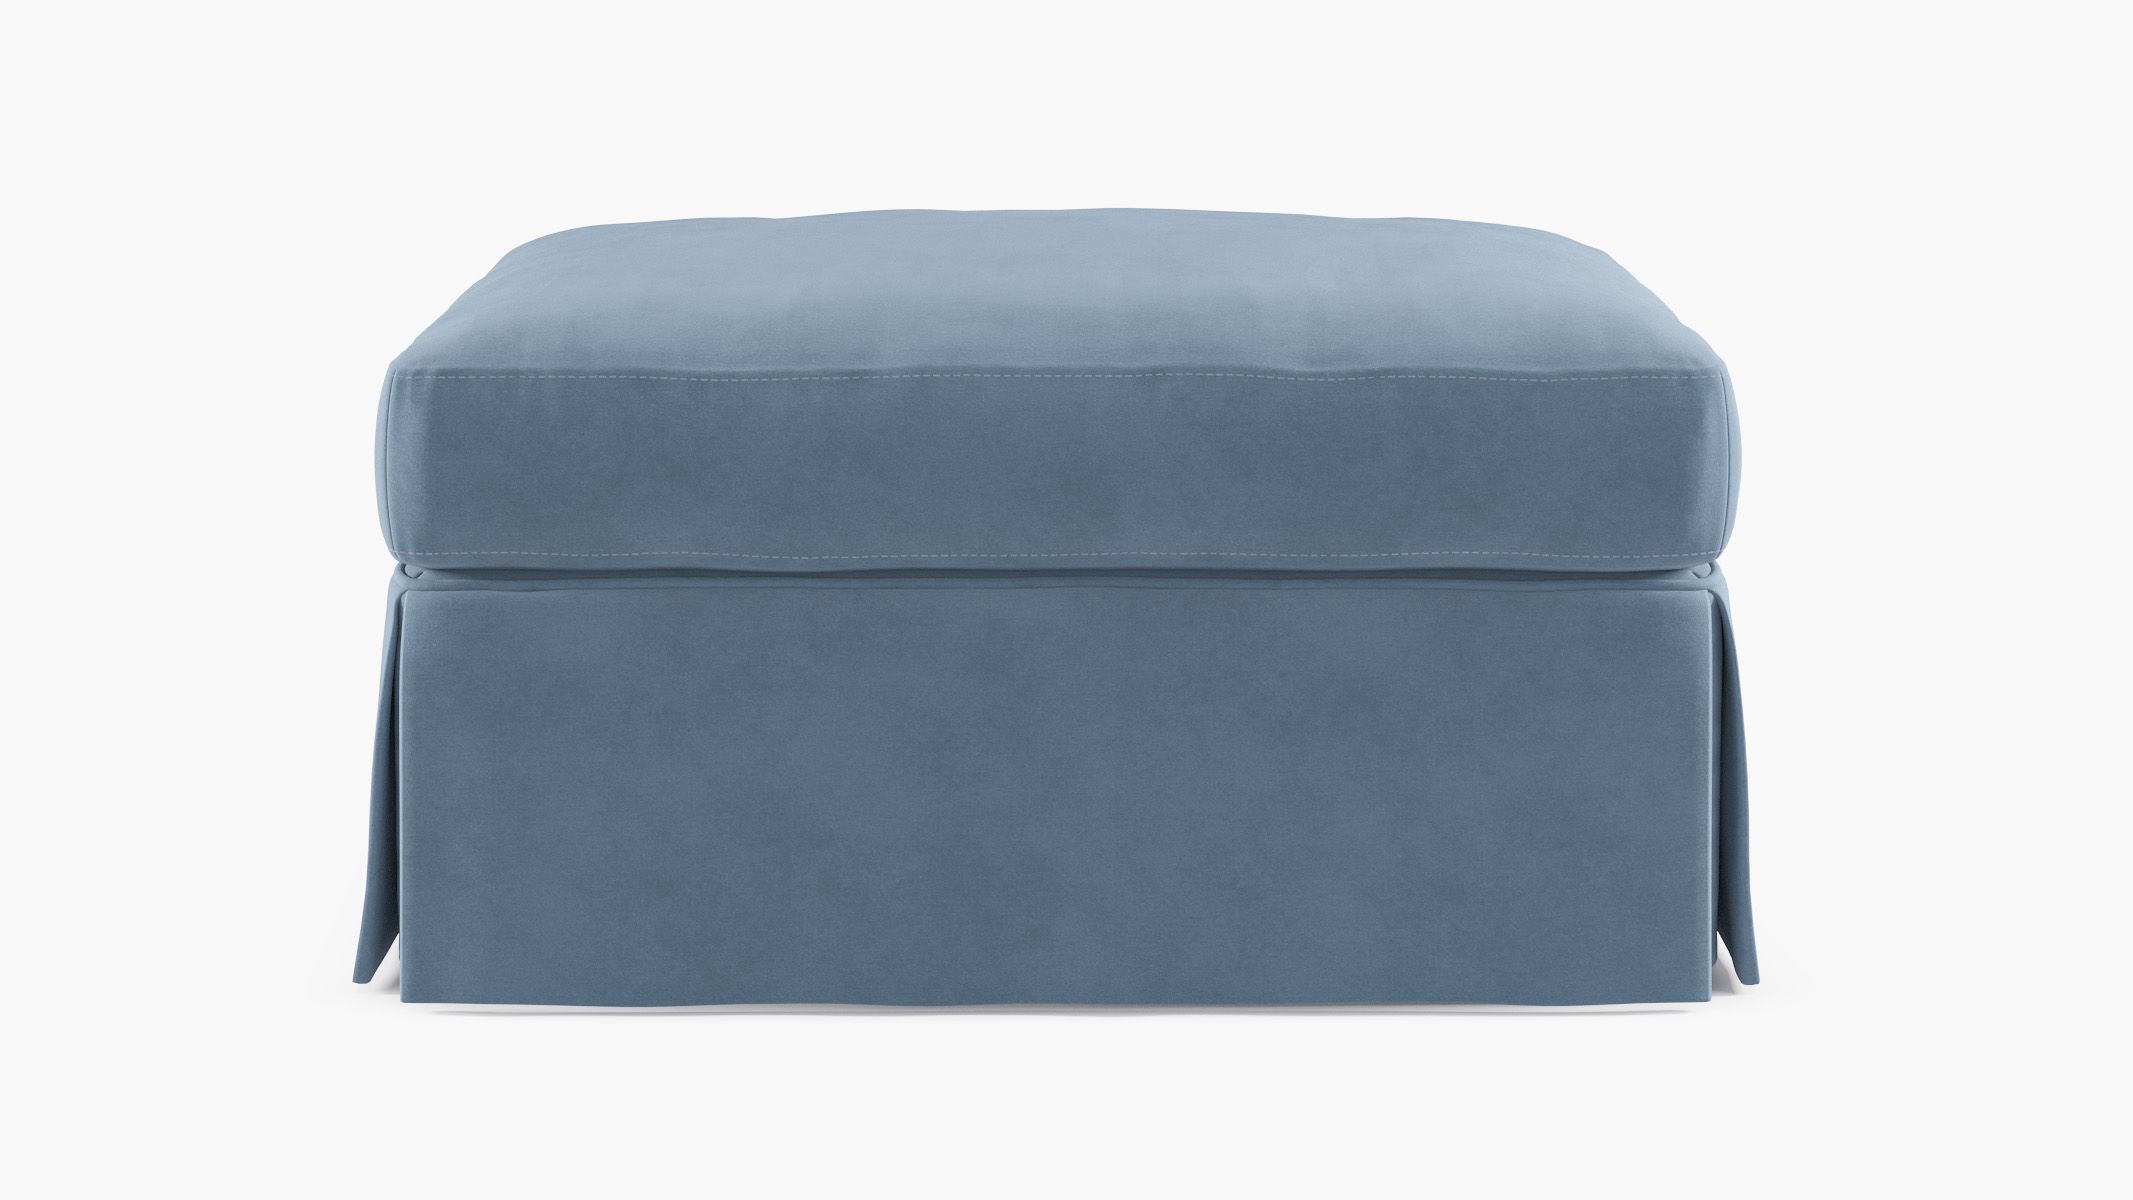 Does this ottoman open for storage inside? | The Inside